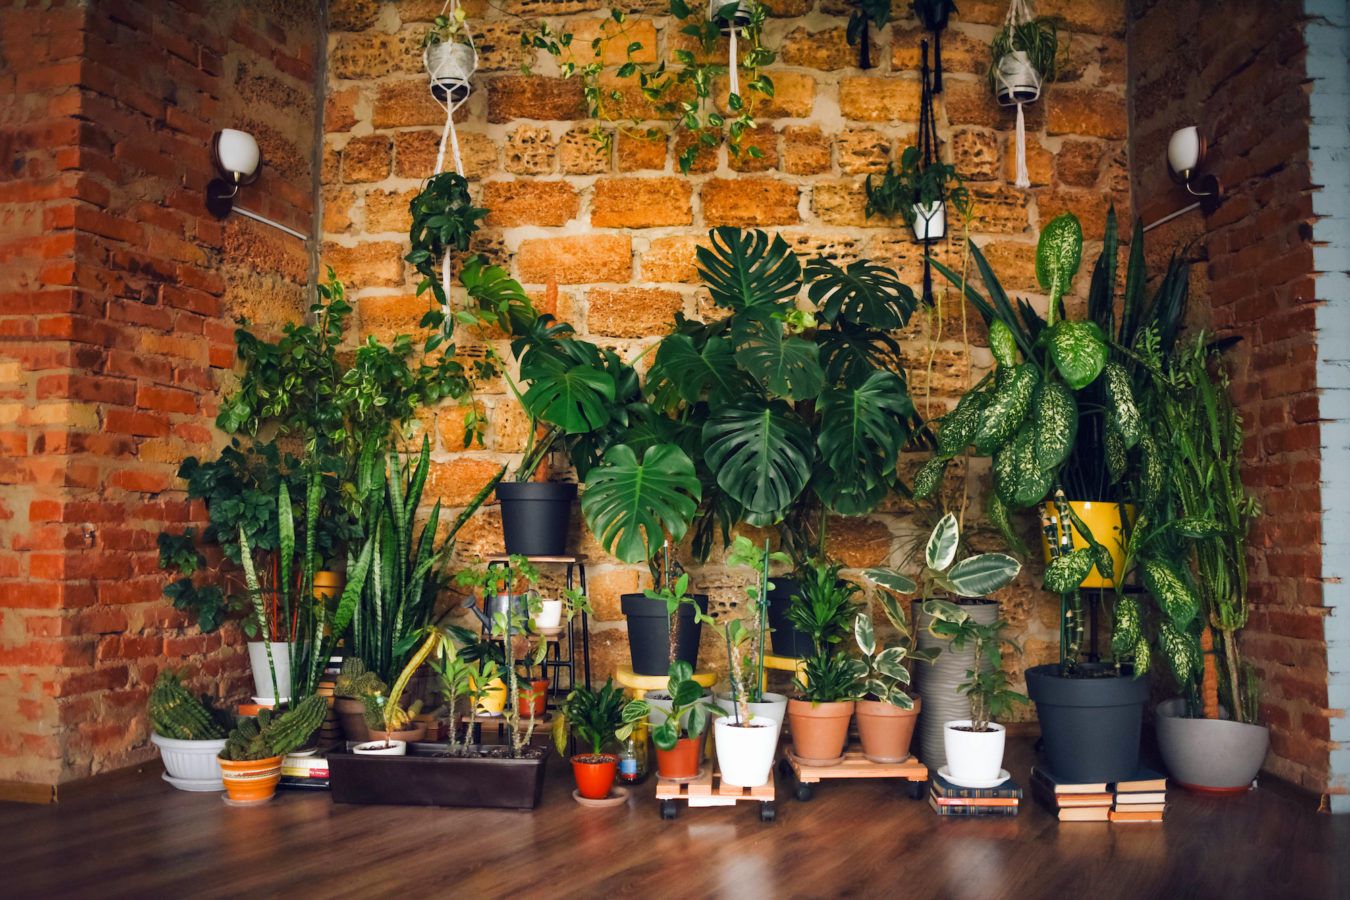 These are the most expensive houseplants in the world